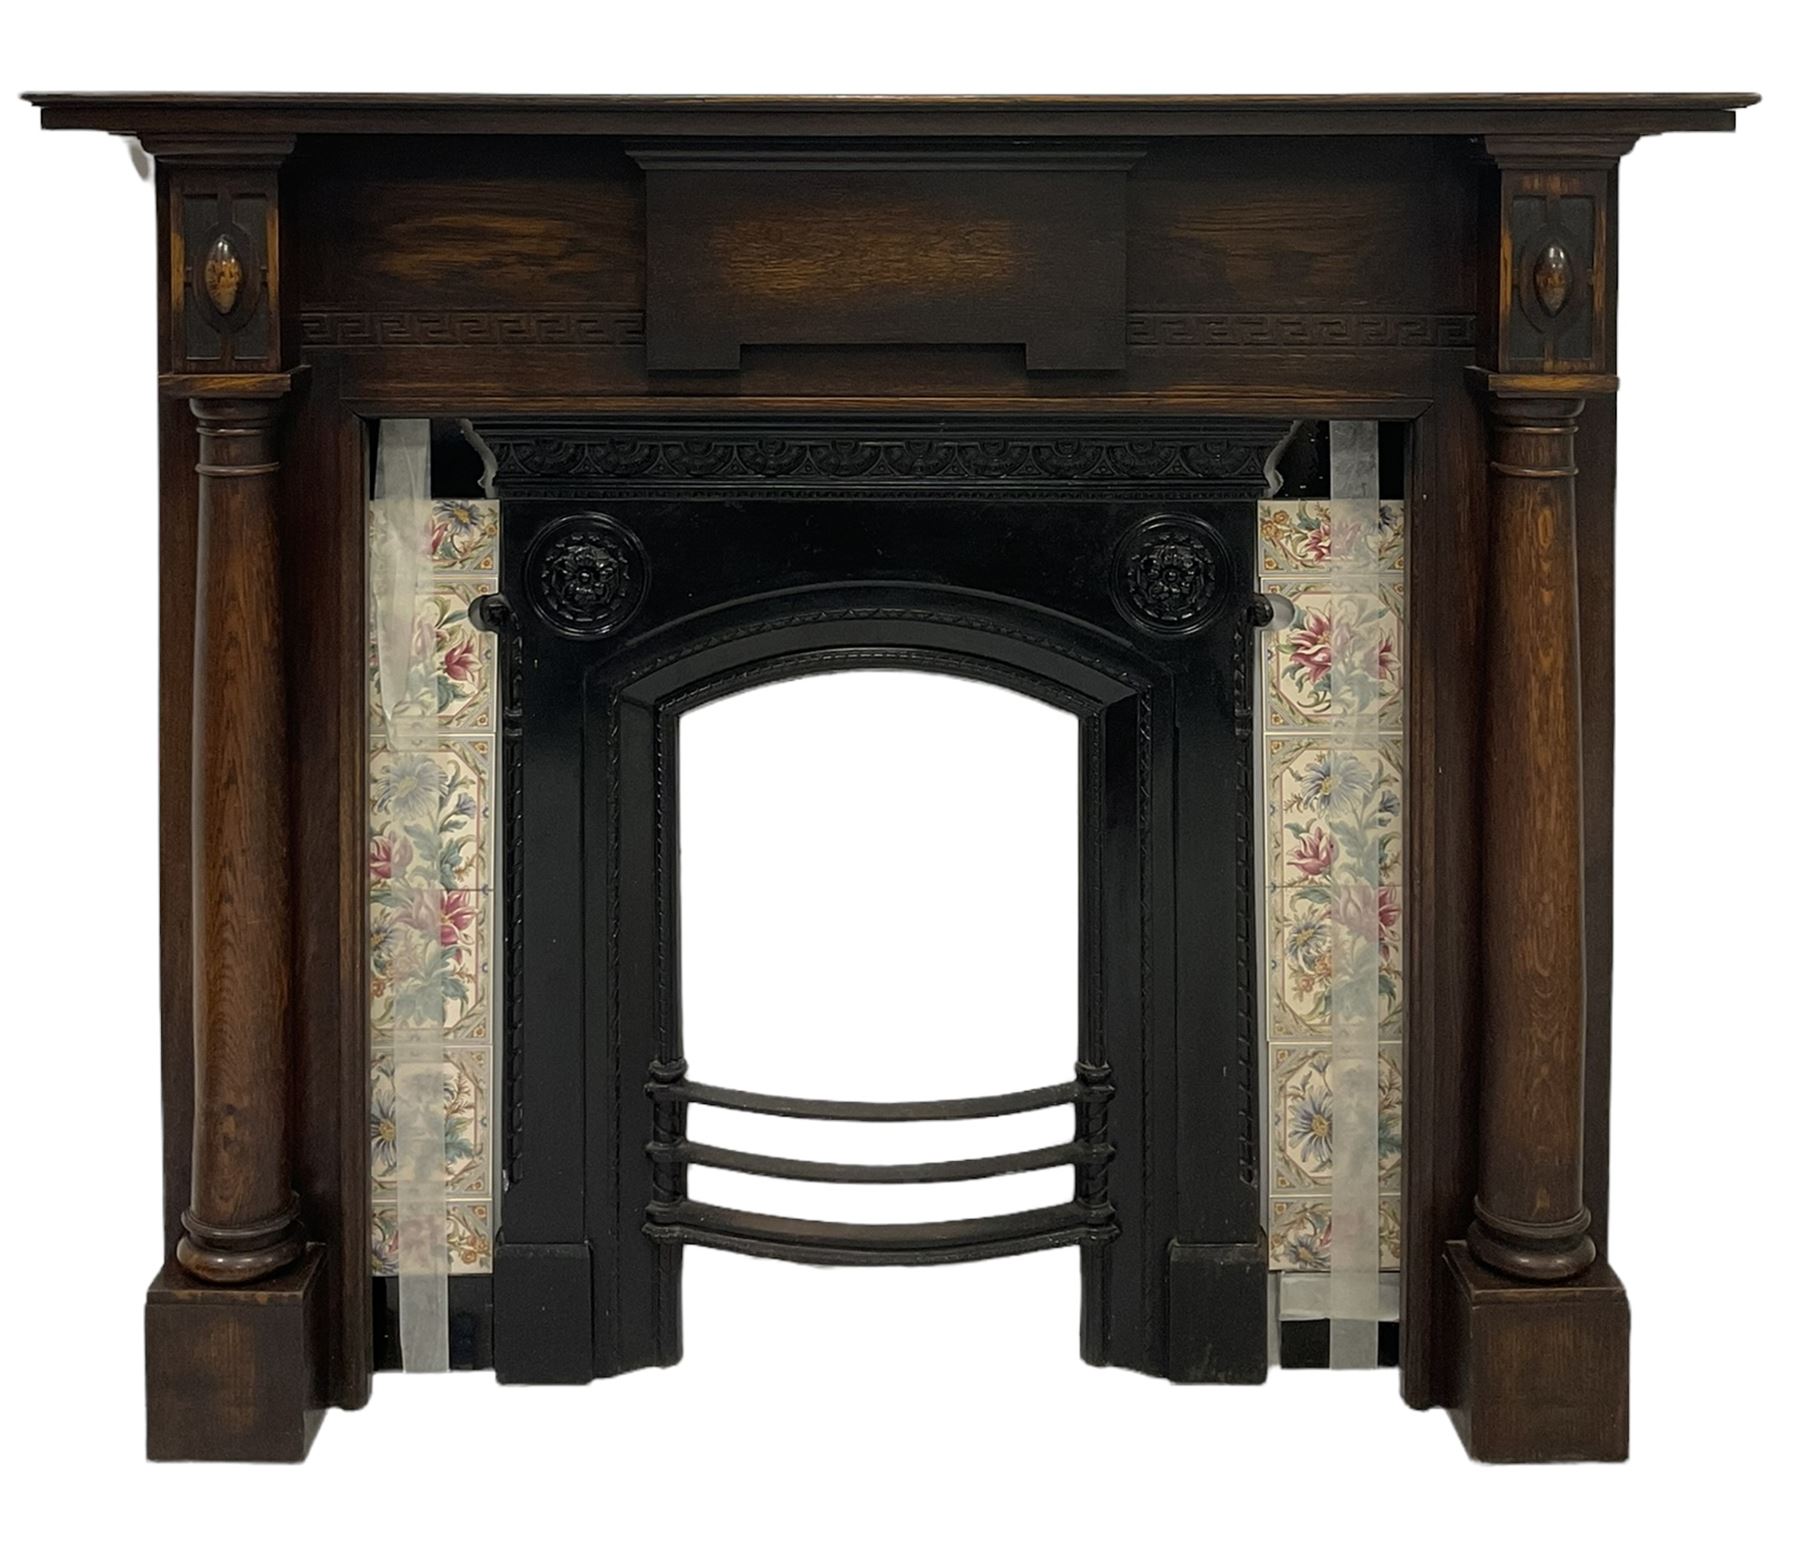 Oak fireplace with two carved columns and Greek keys